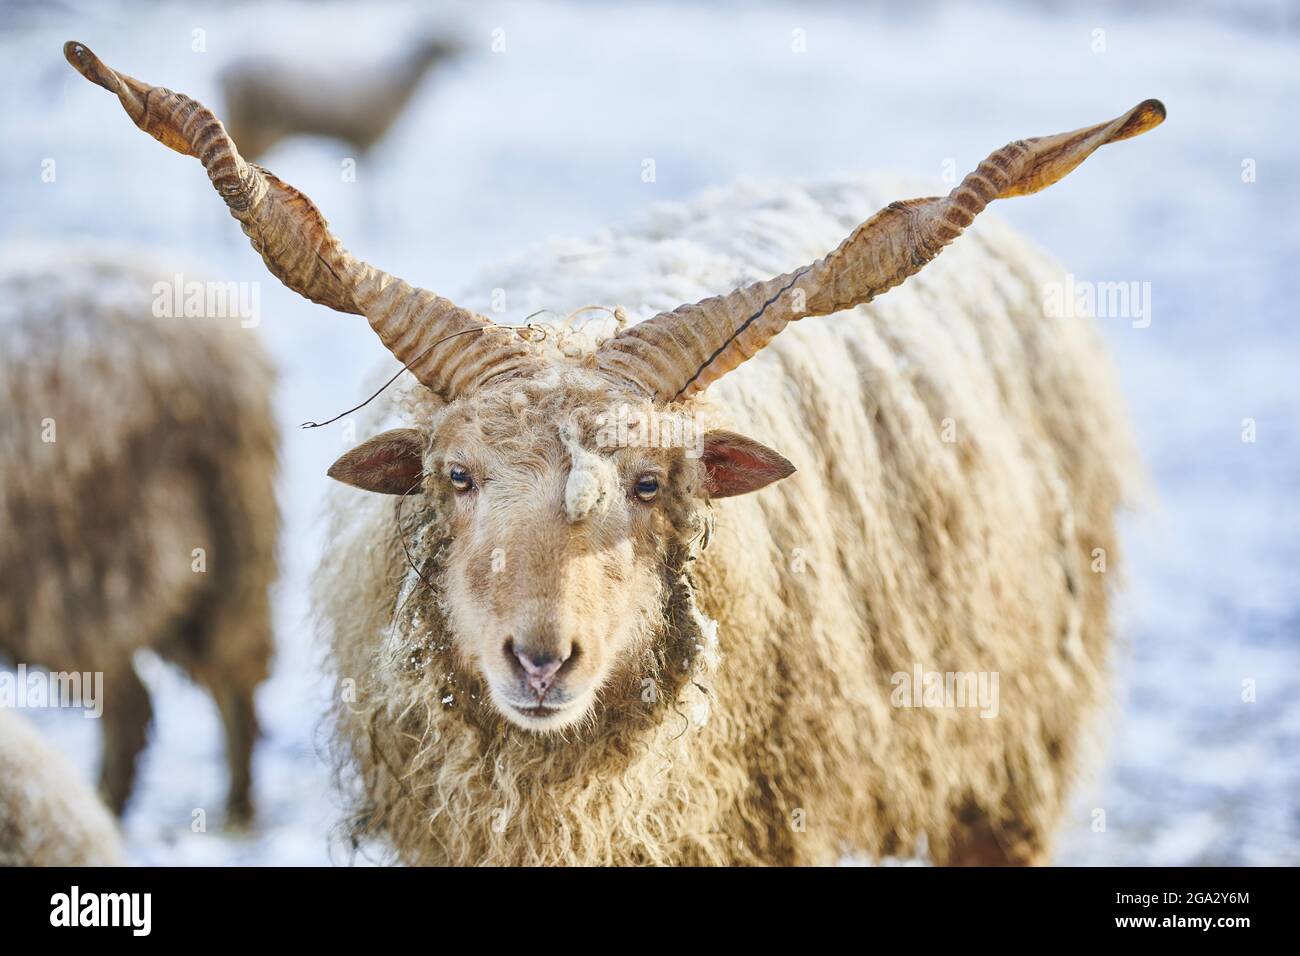 Close-up portrait of a Hortobagy Racka sheep (Ovis aries strepsiceros hungaricus) in winter Stock Photo